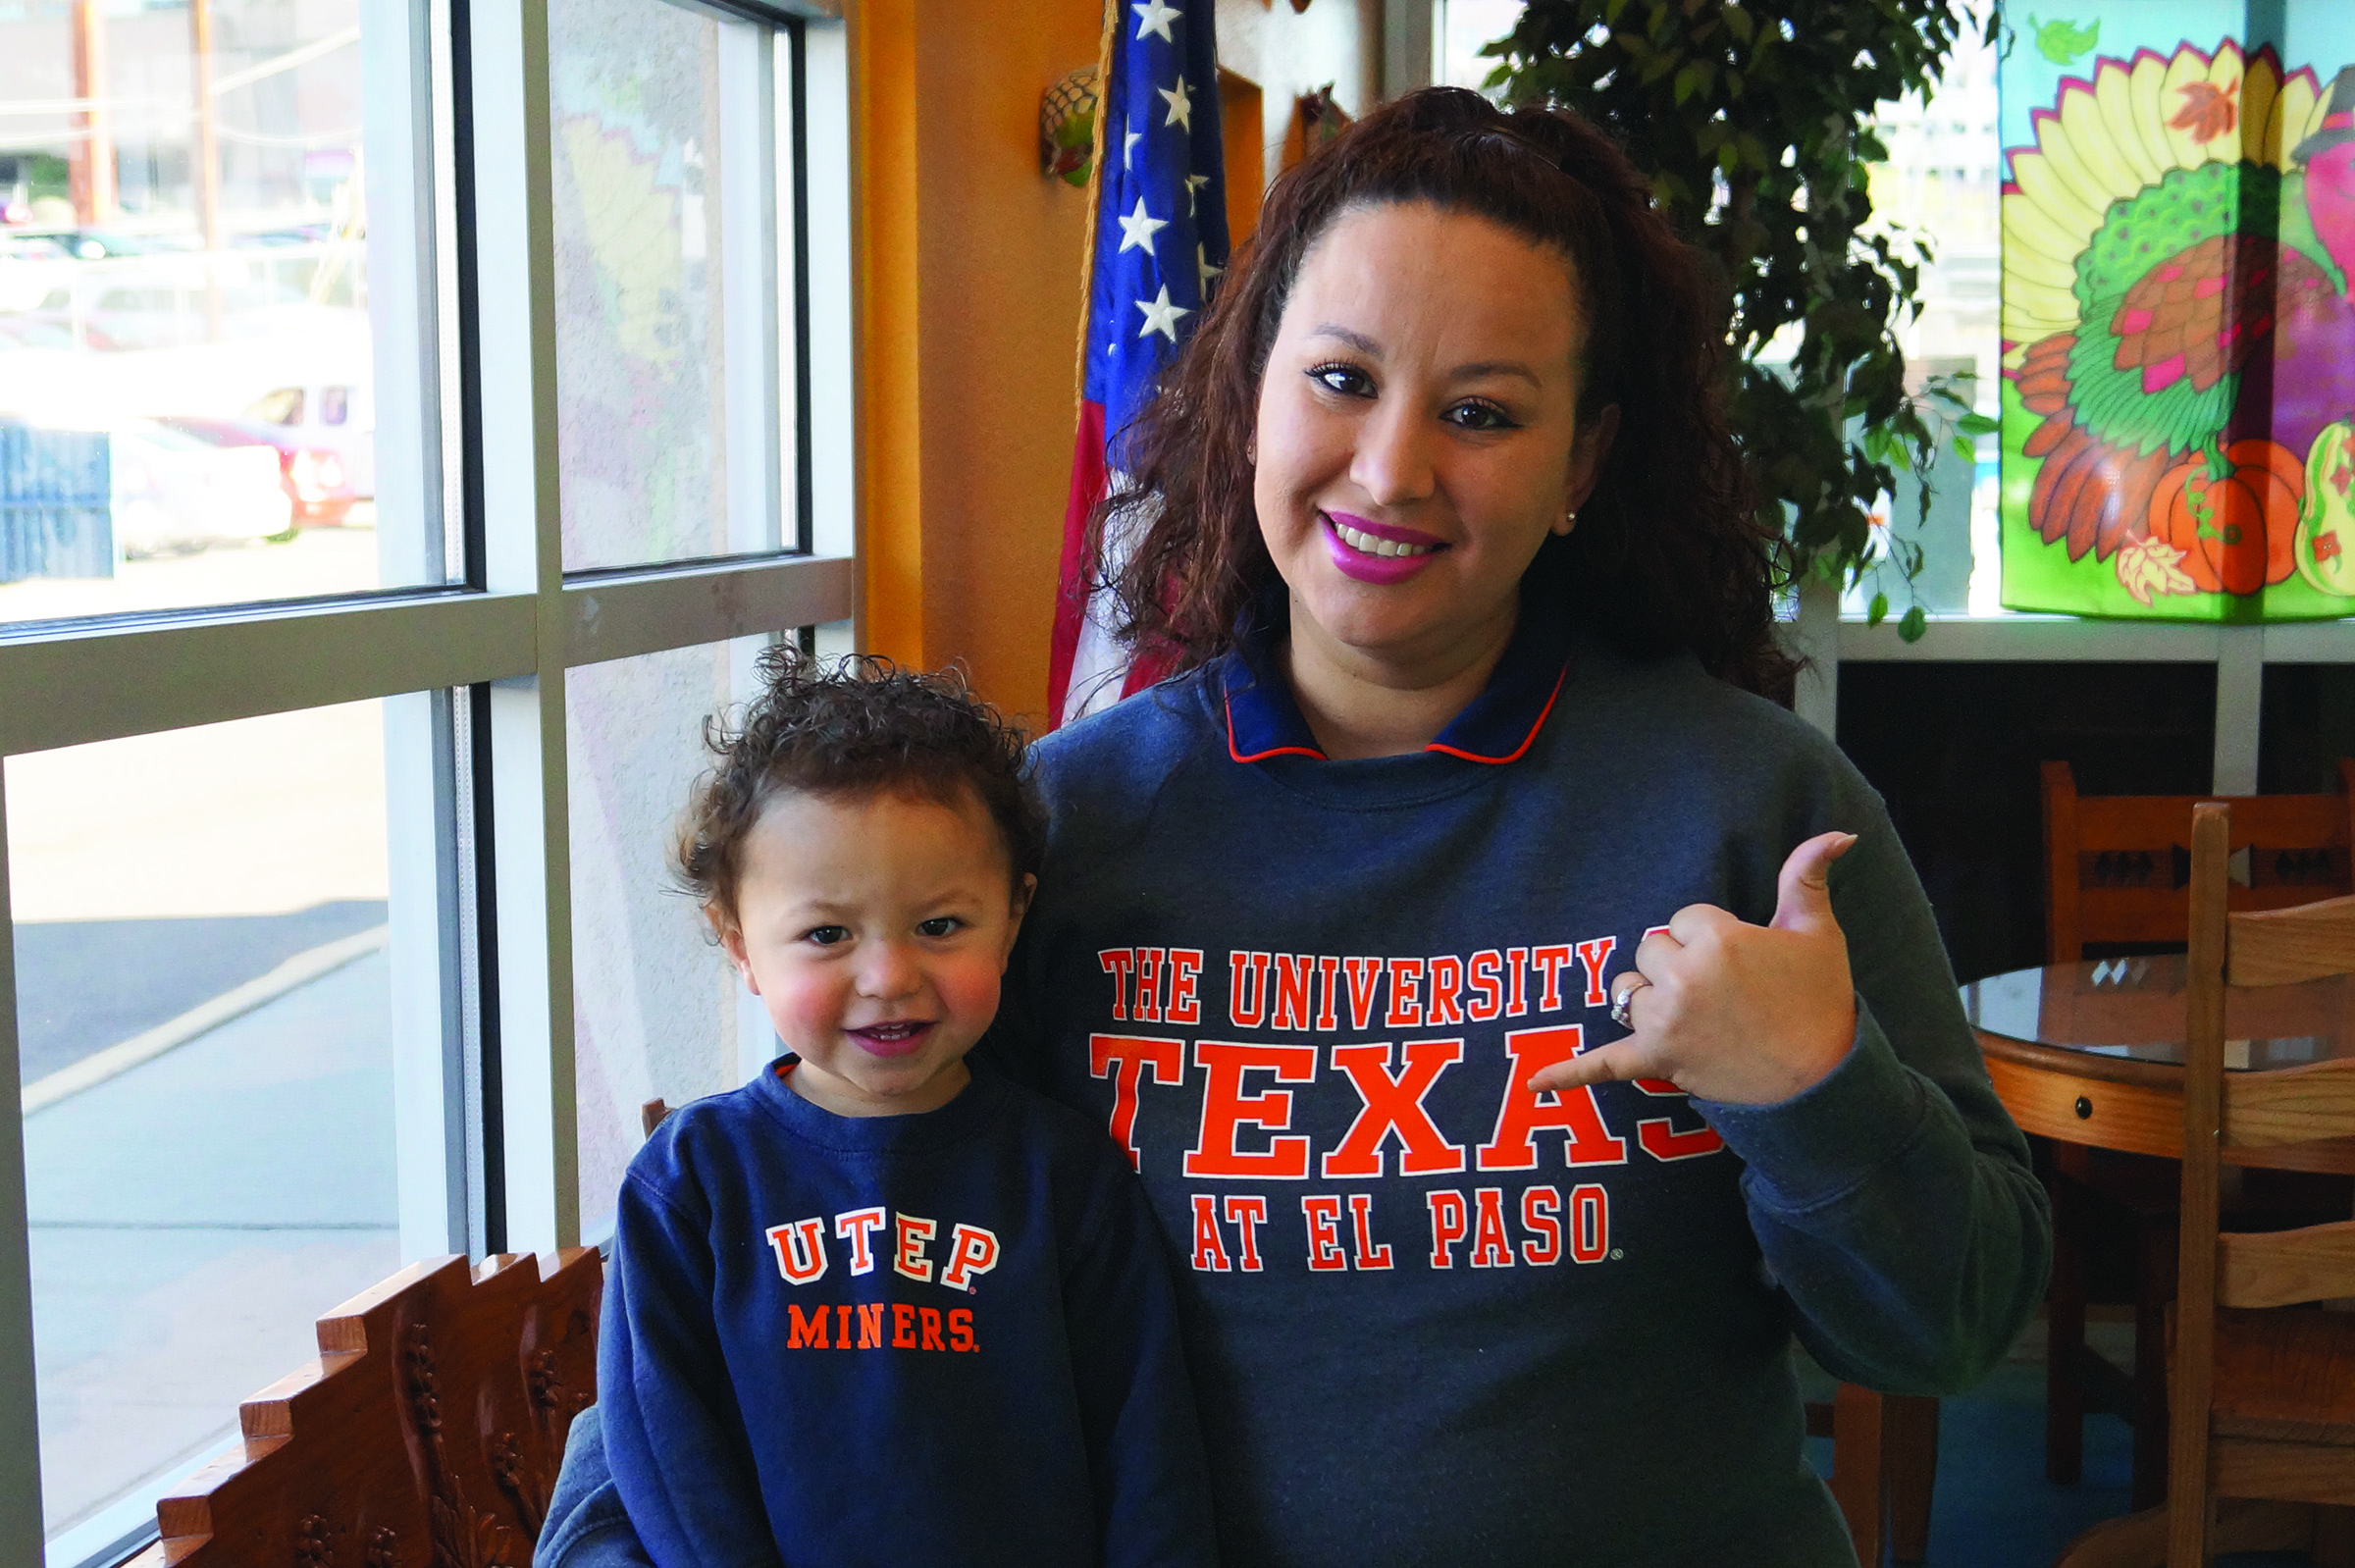 Student and Child in UTEP Gear